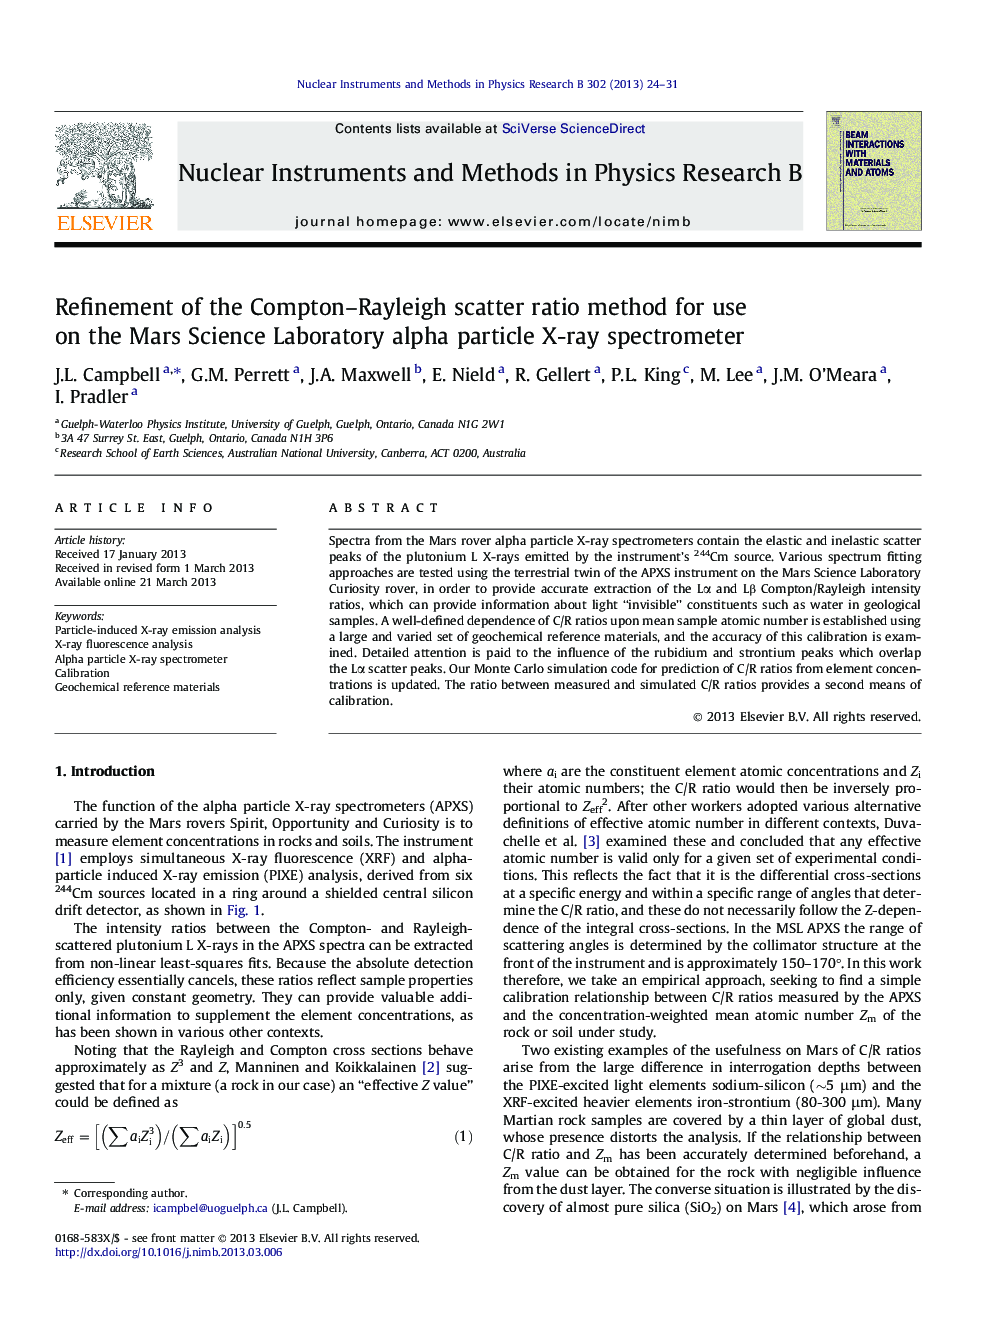 Refinement of the Compton–Rayleigh scatter ratio method for use on the Mars Science Laboratory alpha particle X-ray spectrometer